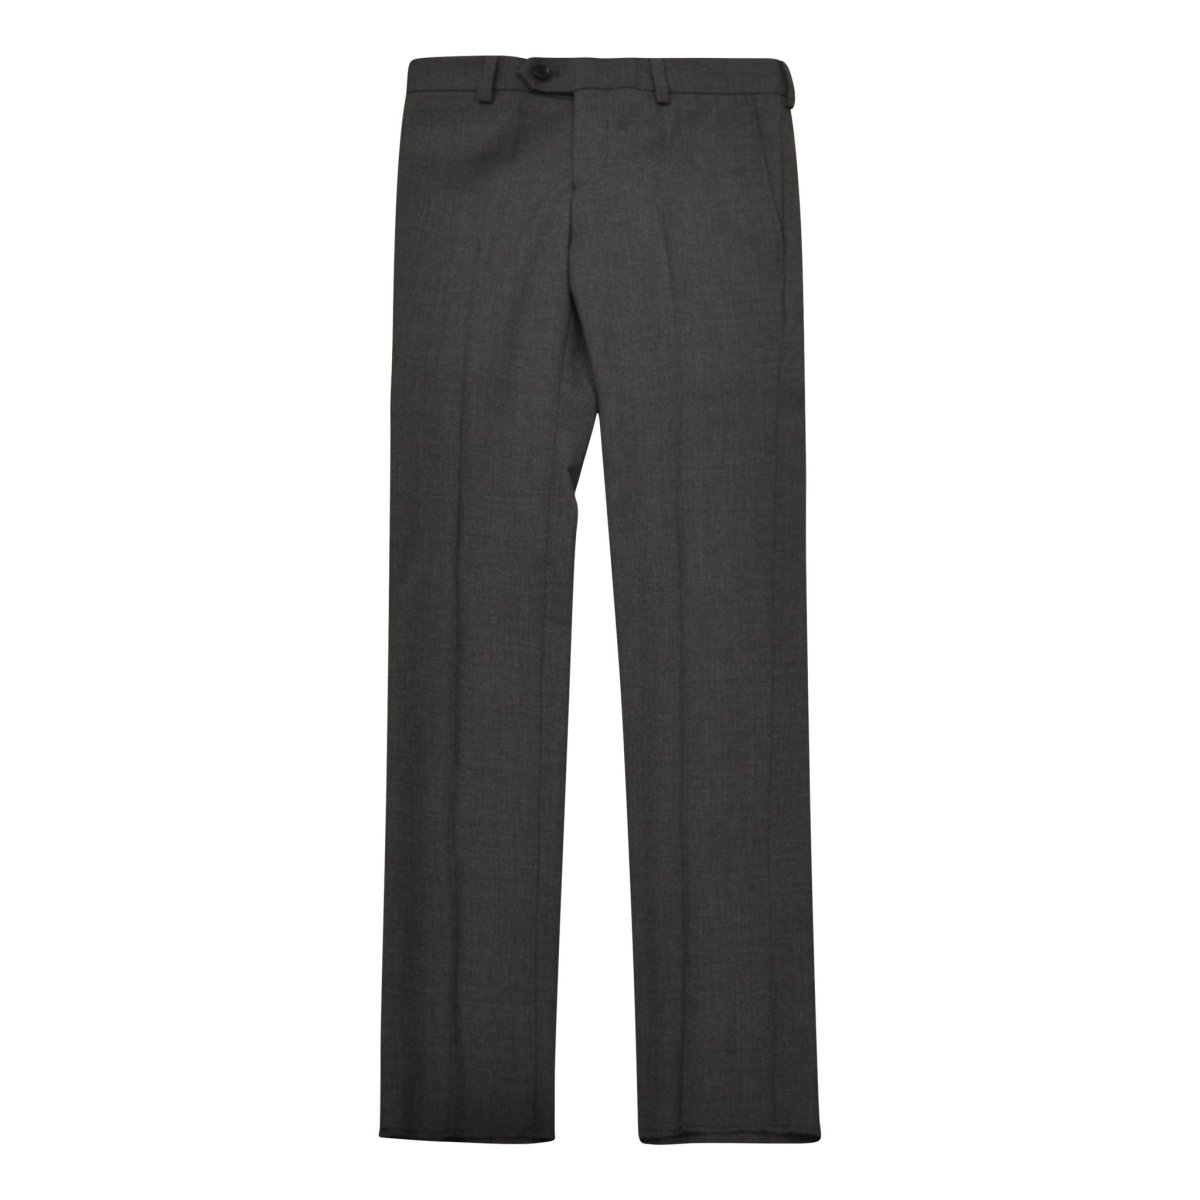 Men's Charcoal Italian Wool Morning Suit Pants – 1913 Collection